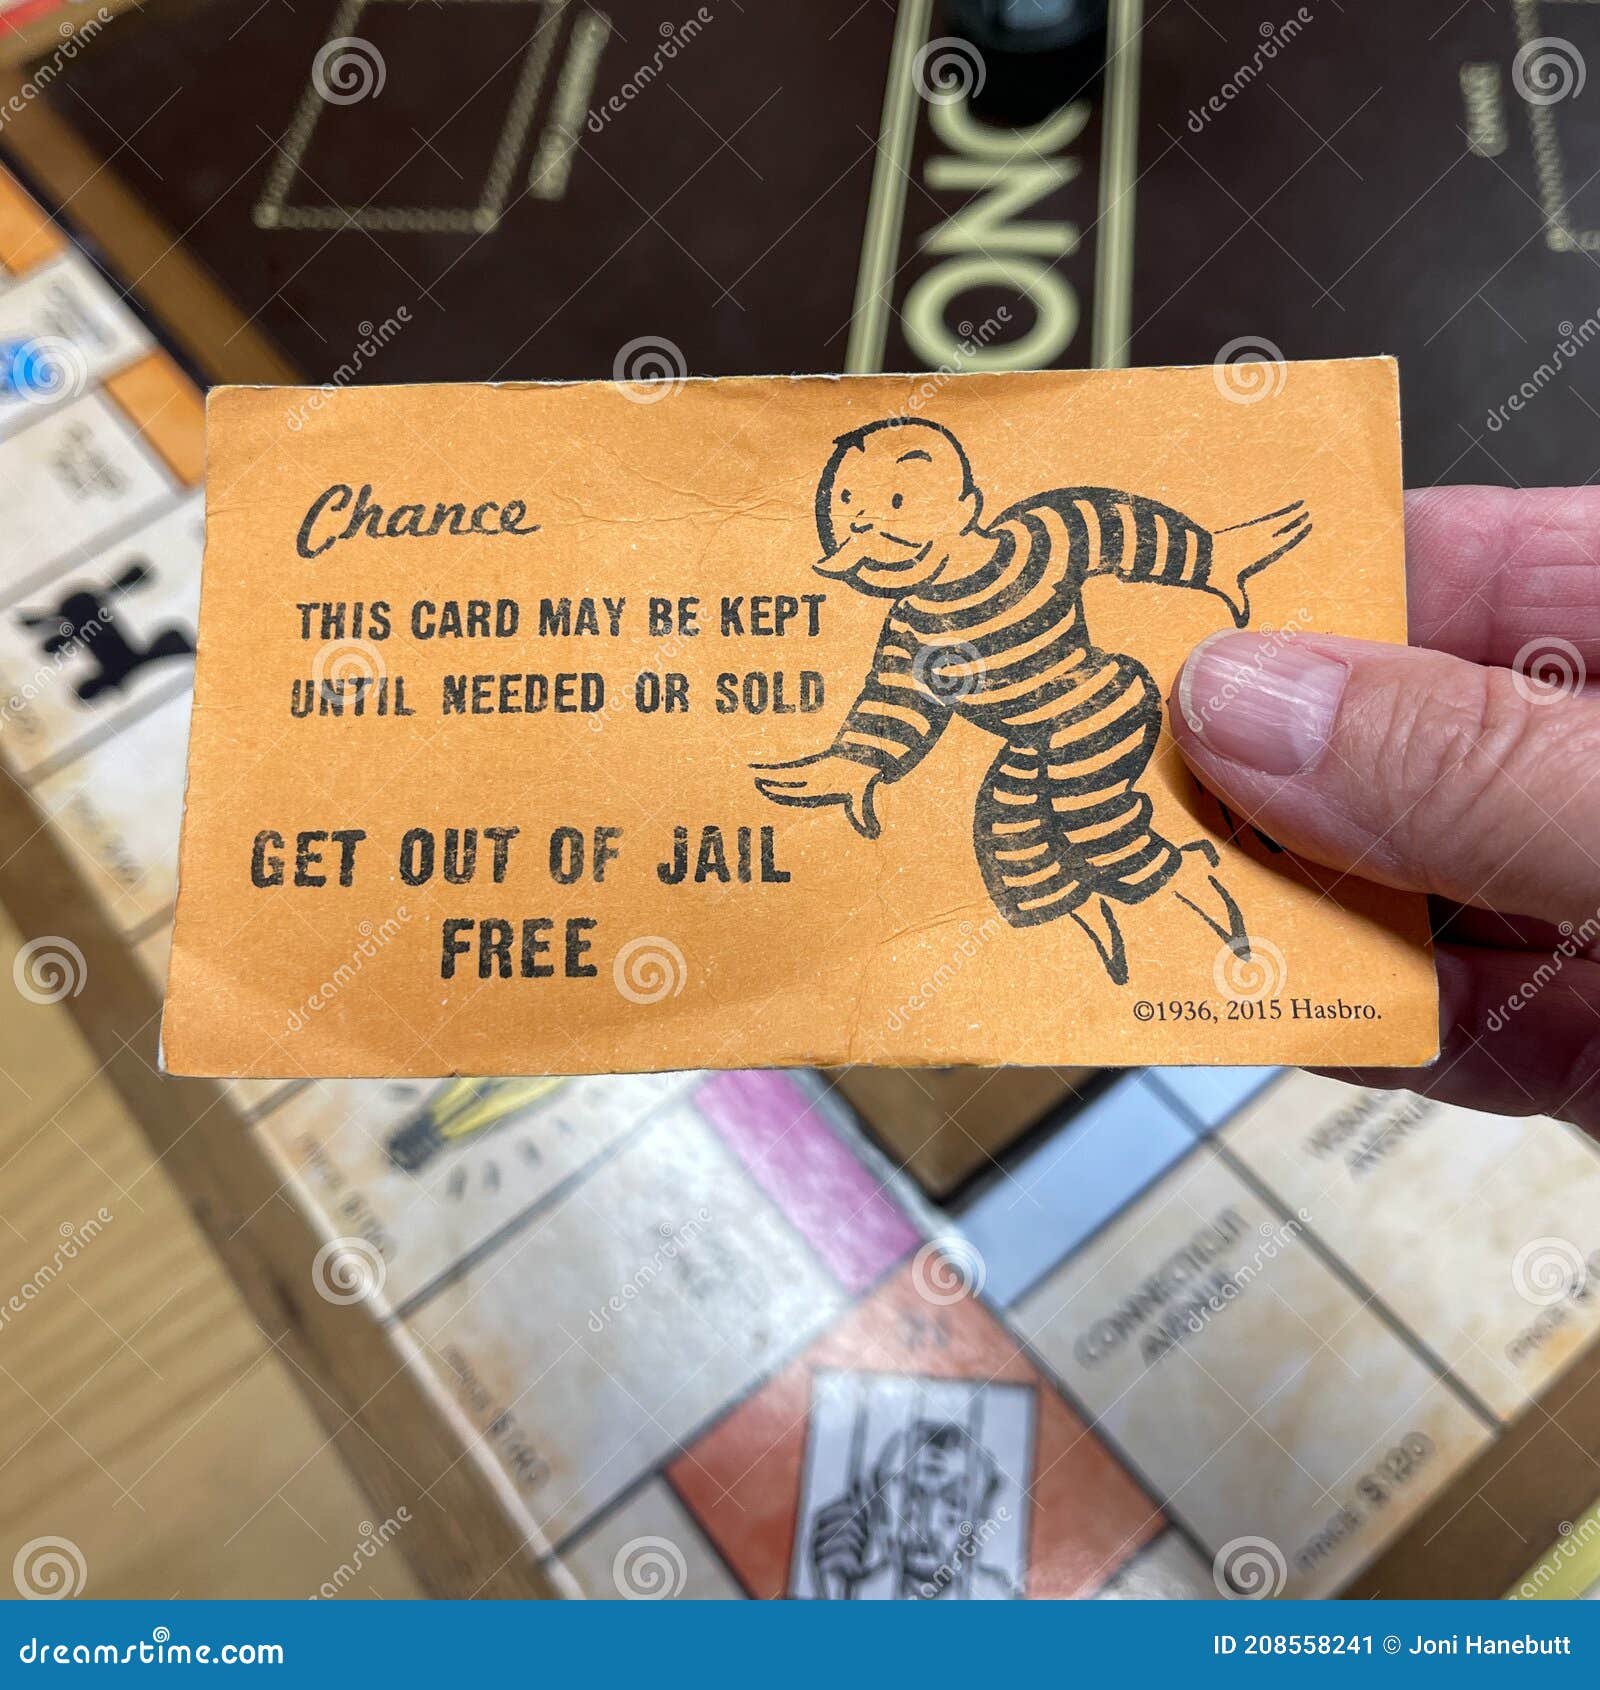 boom-boom-get-out-of-jail-free-card-facebook-jail-jail-cards